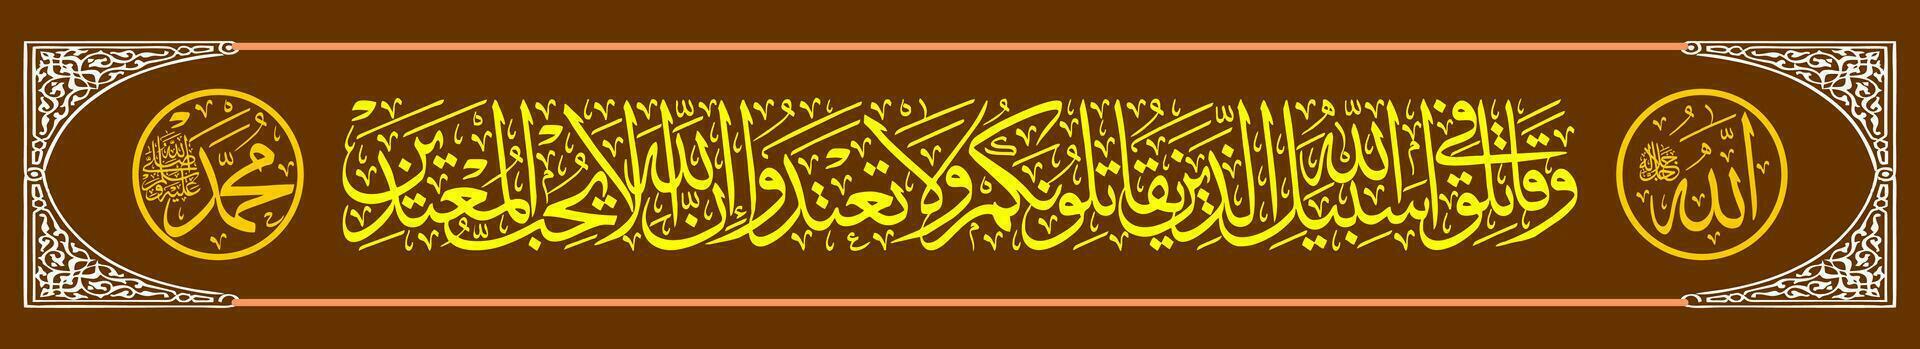 Calligraphy Thuluth Al Qur'an Surat Al Baqarah 190 which means And fight in the way of Allah those who fight you, but do not go beyond the limit. Indeed, vector